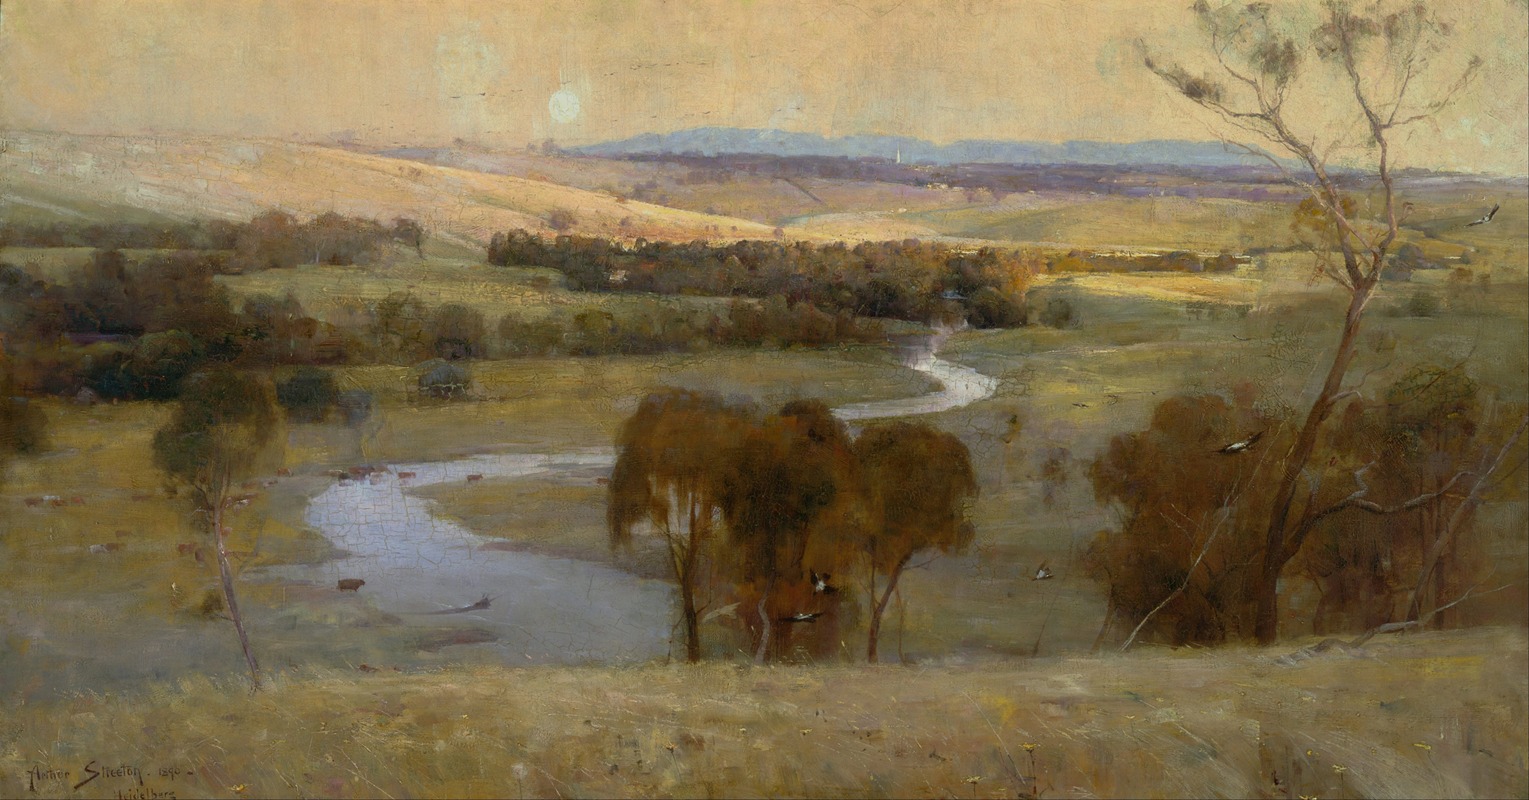 Arthur Streeton - ‘Still glides the stream, and shall for ever glide’